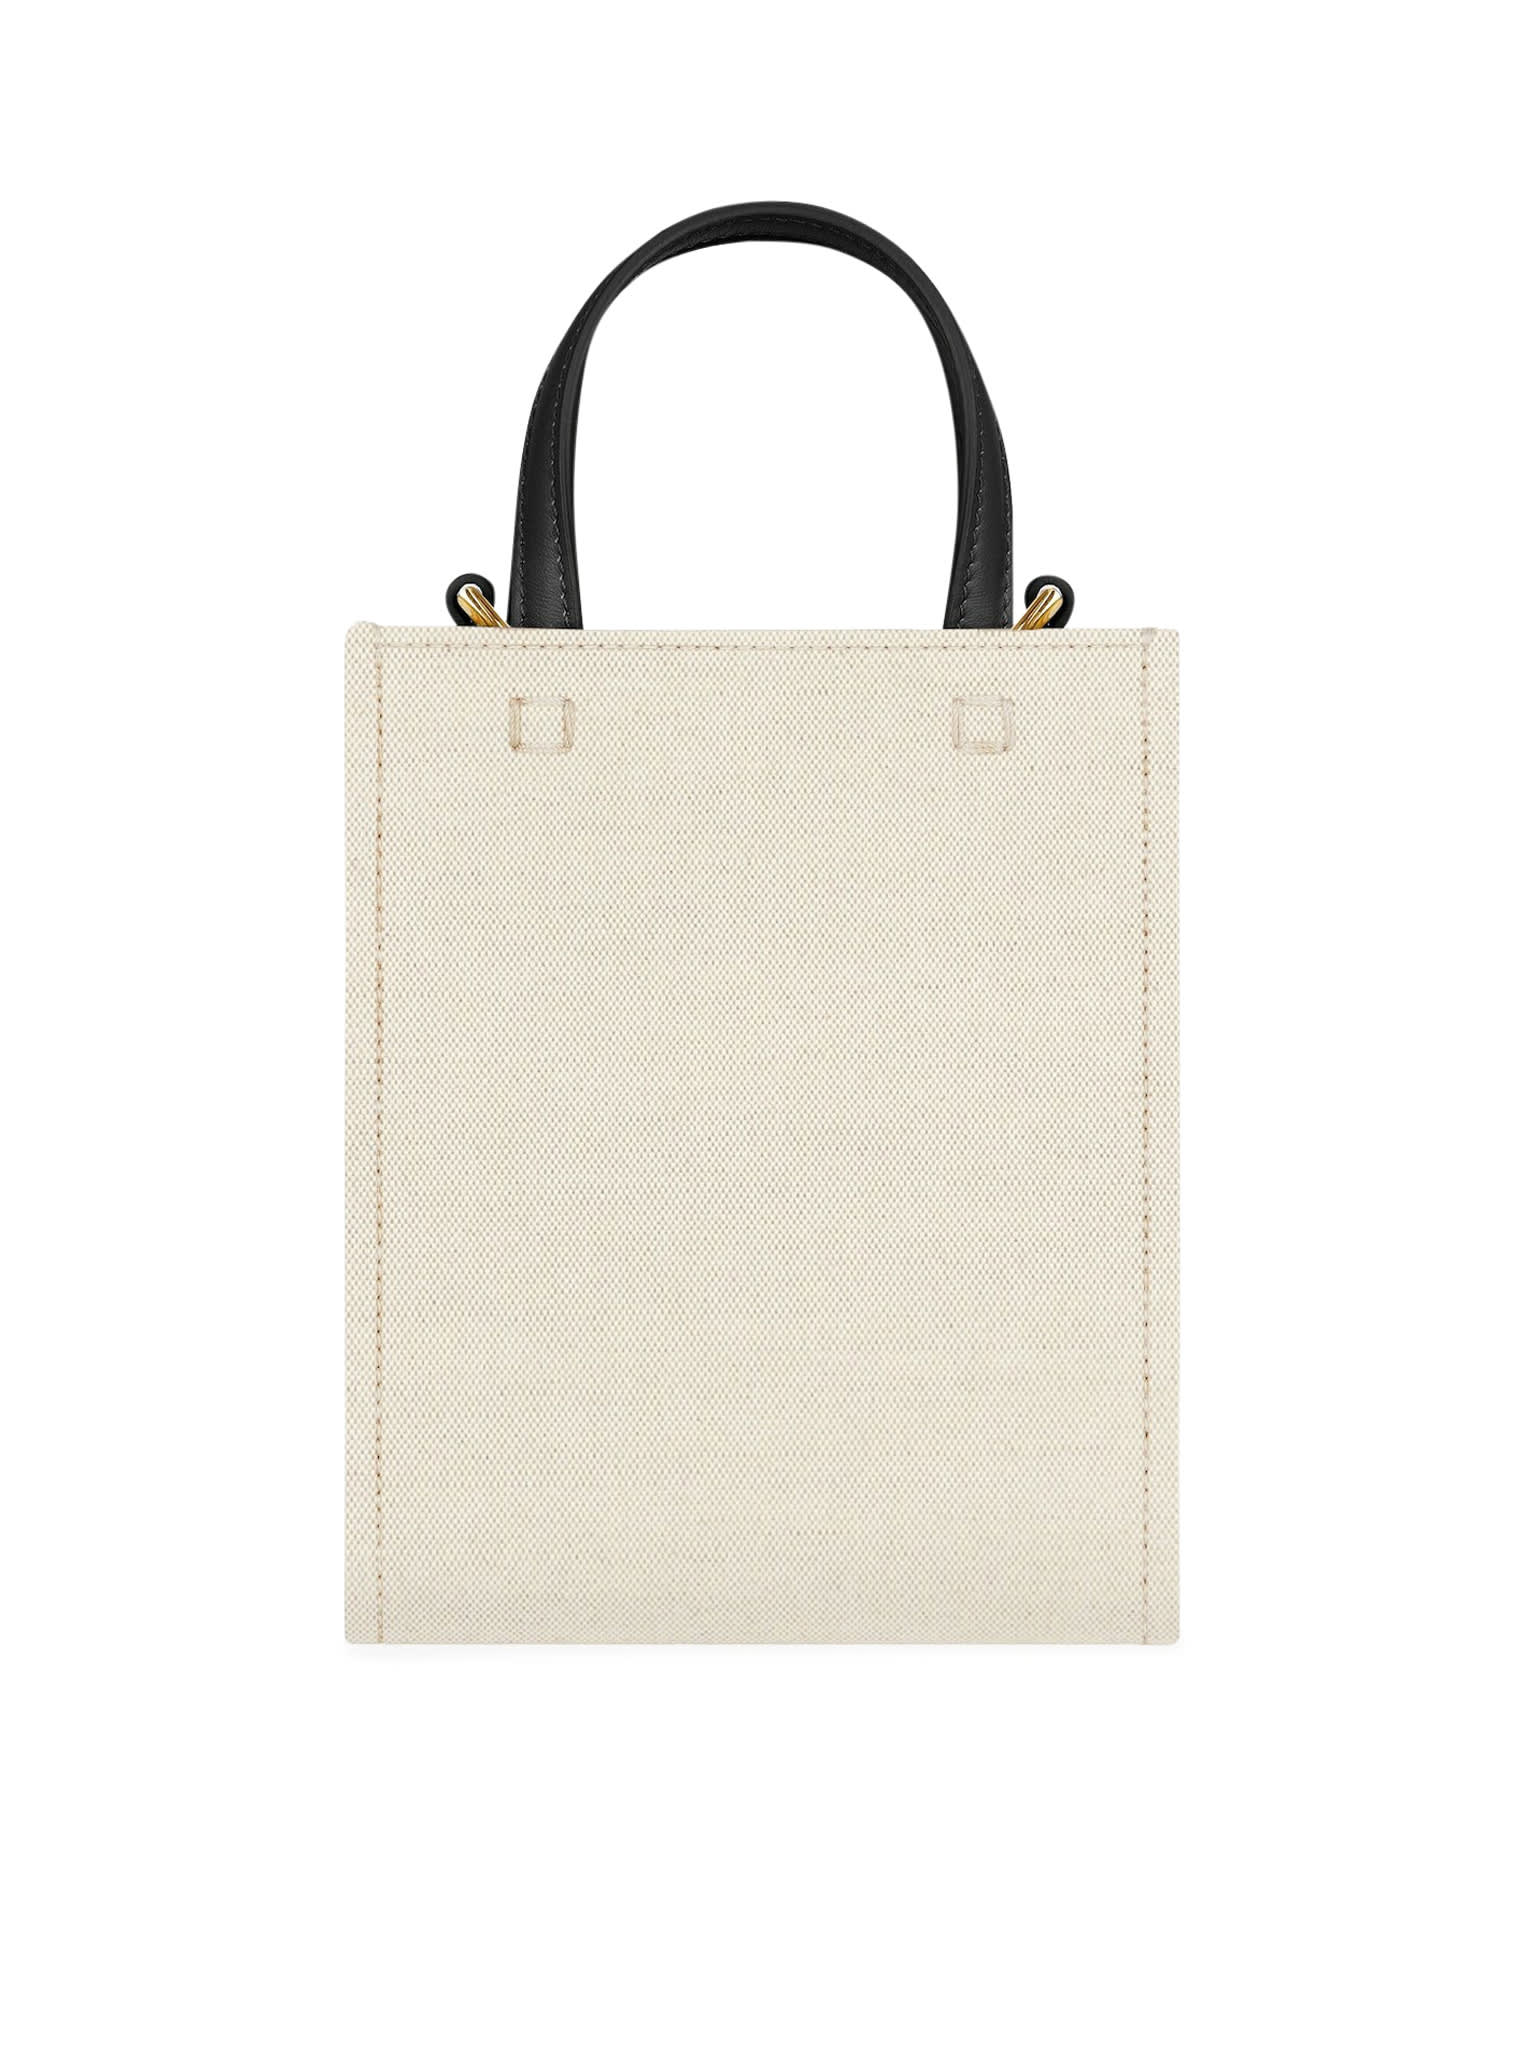 G-Tote mini leather-trimmed printed coated-canvas tote